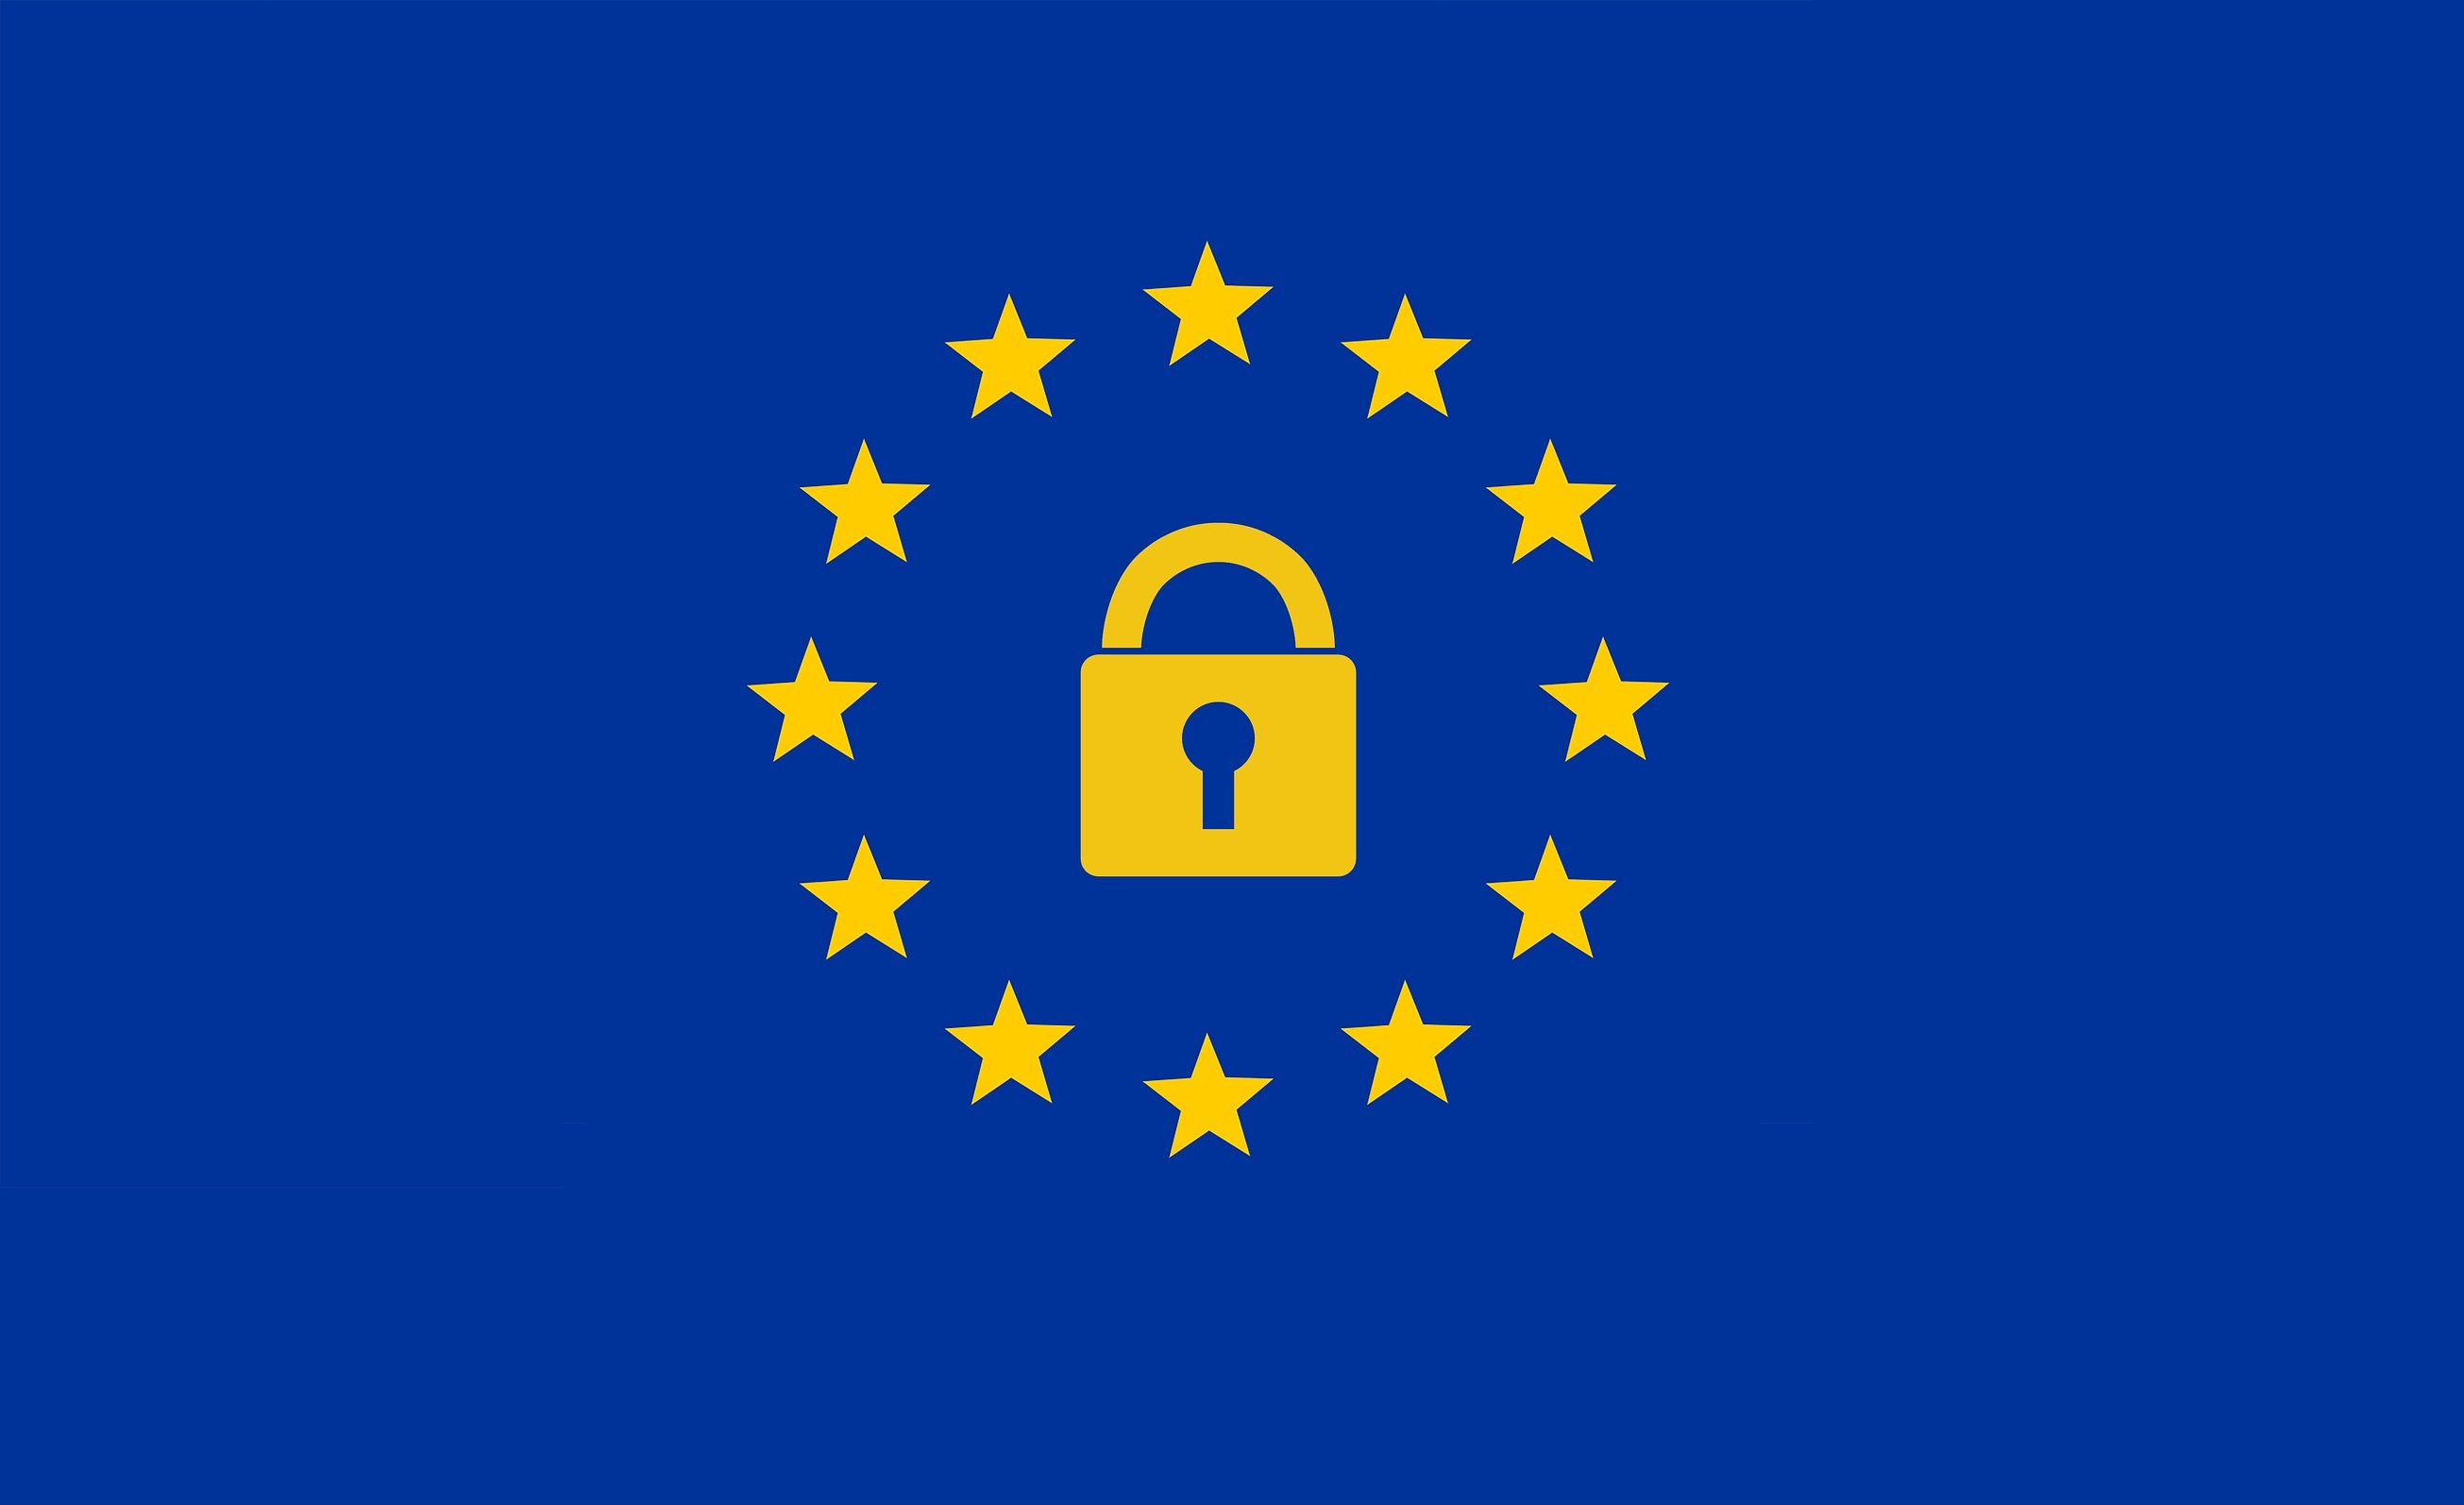 100 Days of the GDPR and Many Open Questions